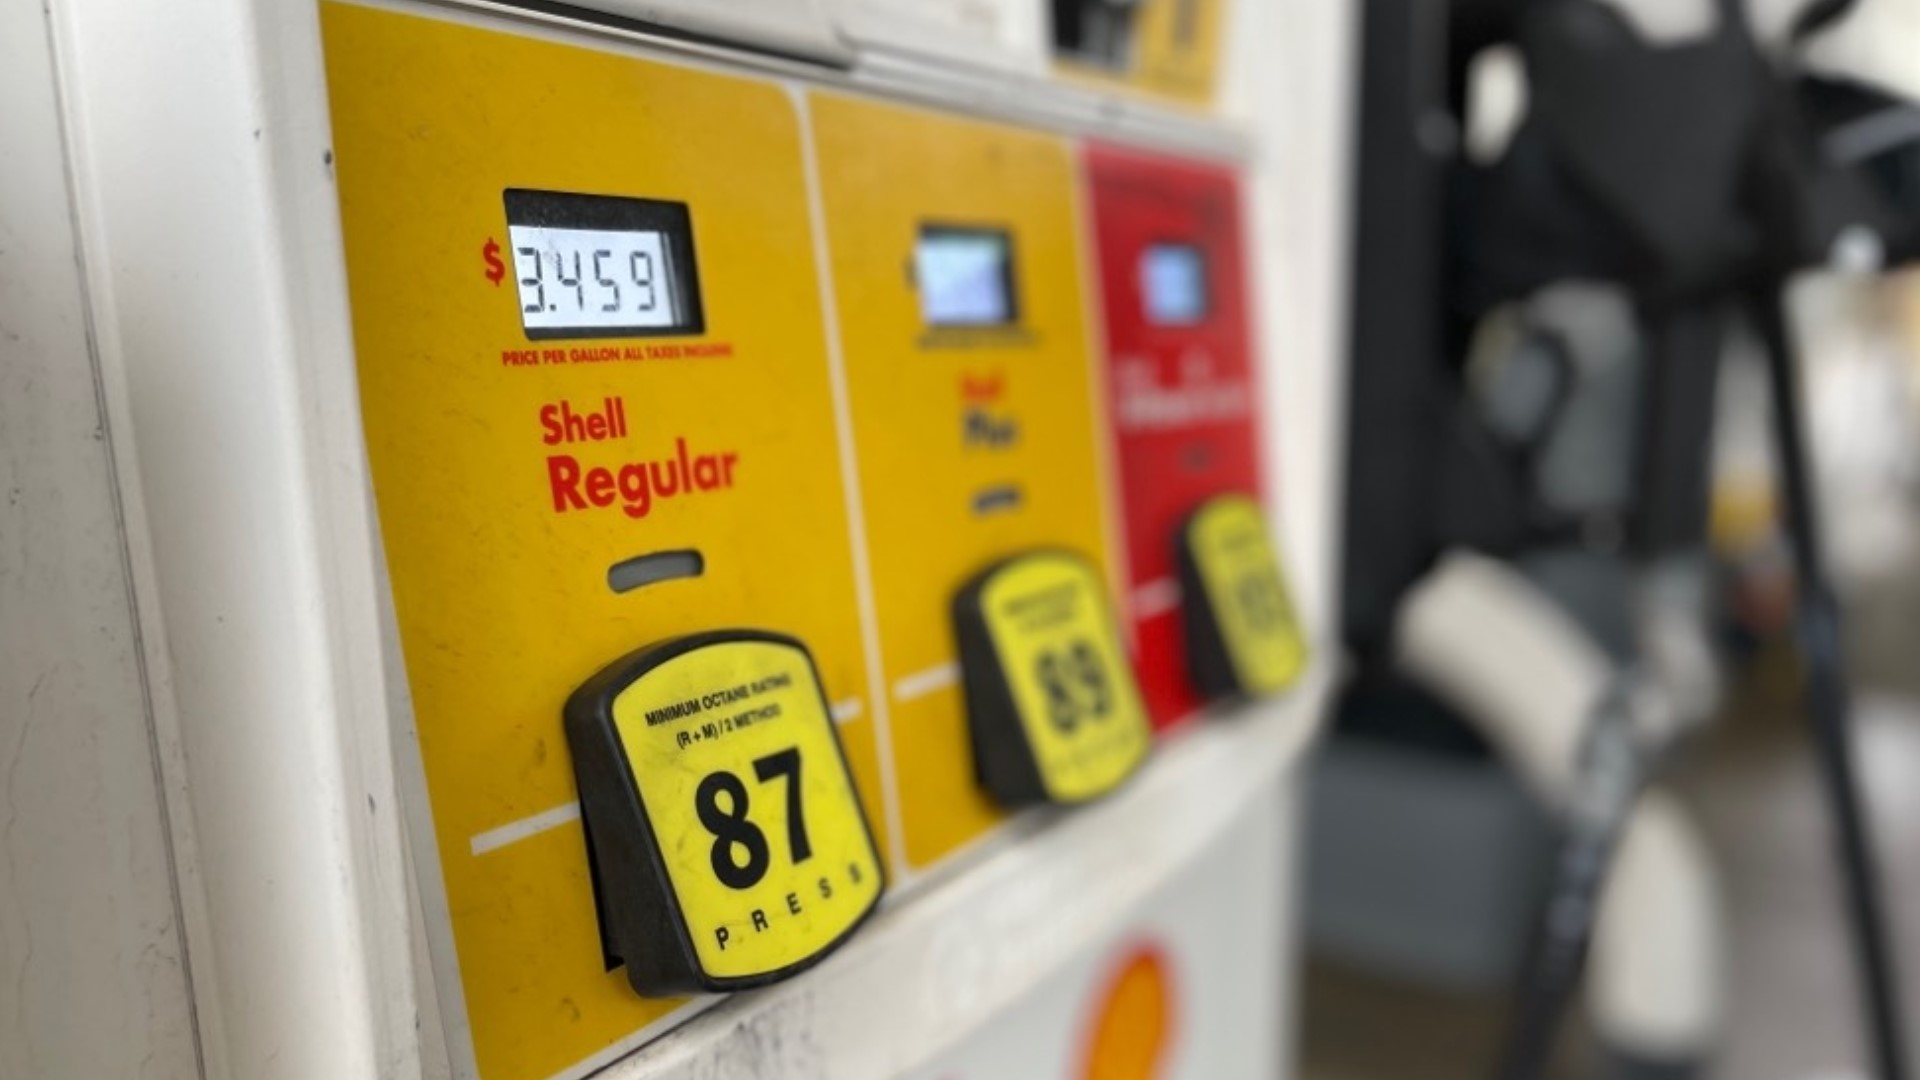 Right now - Kentuckians are paying an average of 3.22 a gallon for regular gasoline. That's Up 25 cents from a month ago and 78 cents from a year ago.